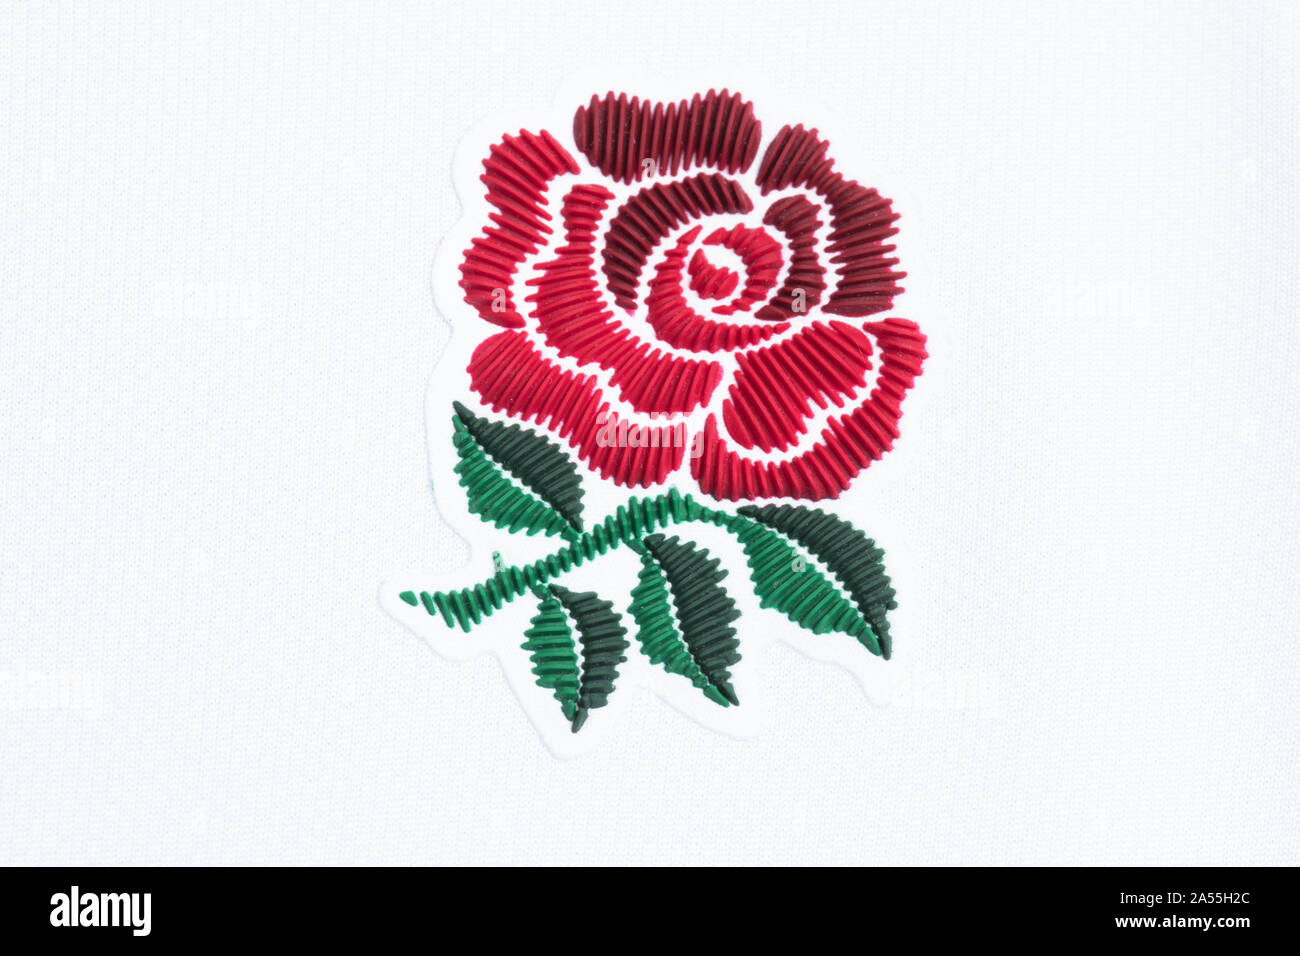 Close up of England Rugby World Cup 2019 Maillot Canterbury. Banque D'Images